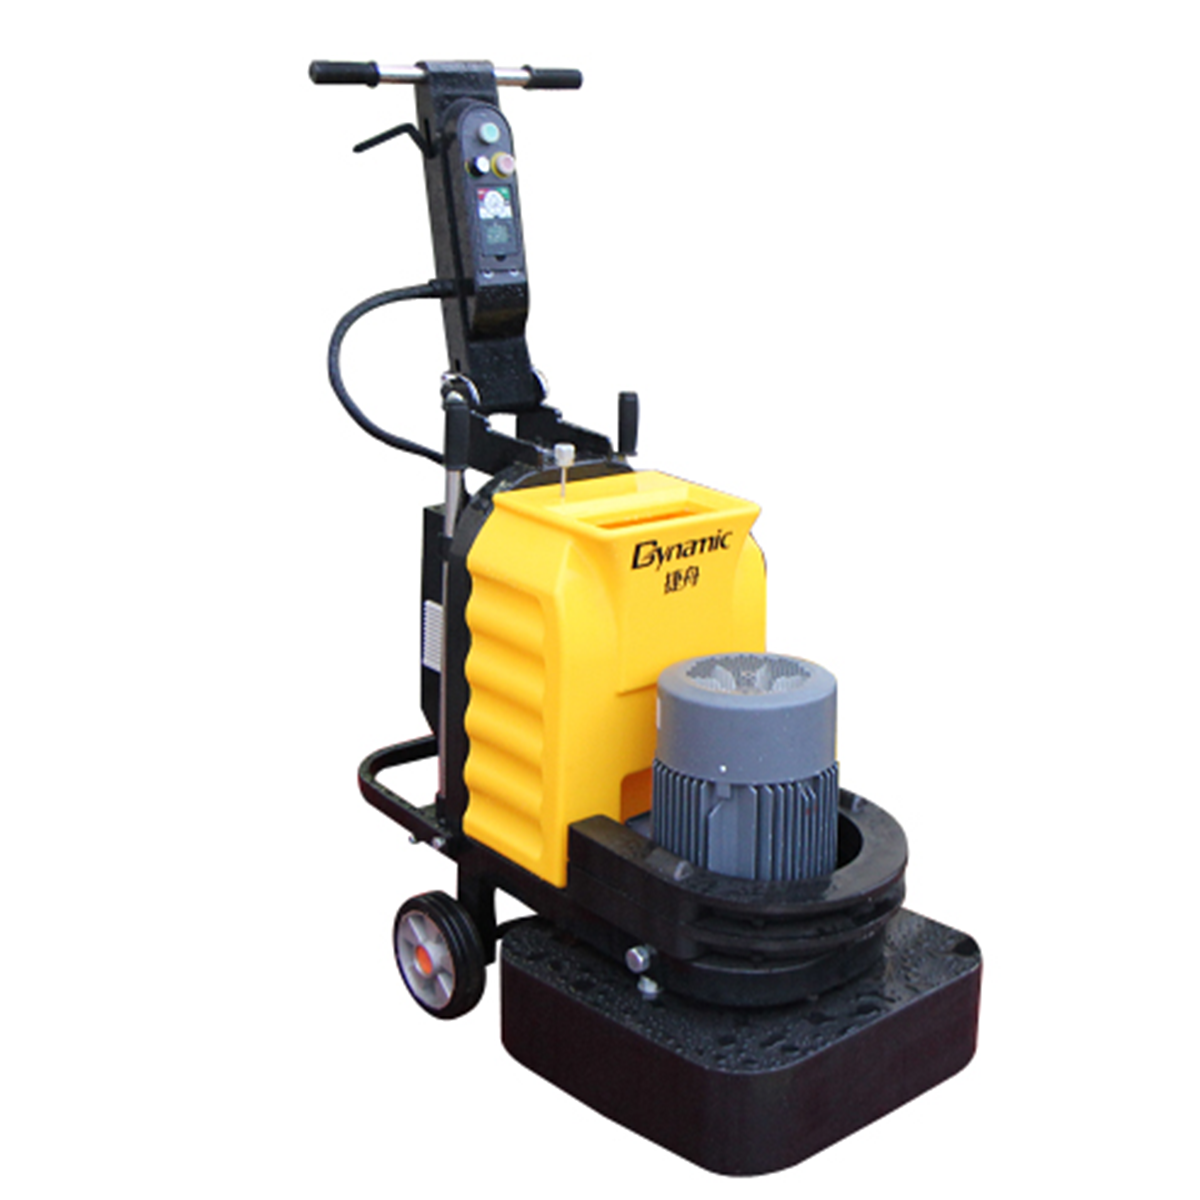 DY580/640/720  Multi functional floor grinder with various voltages and sizes Featured Image